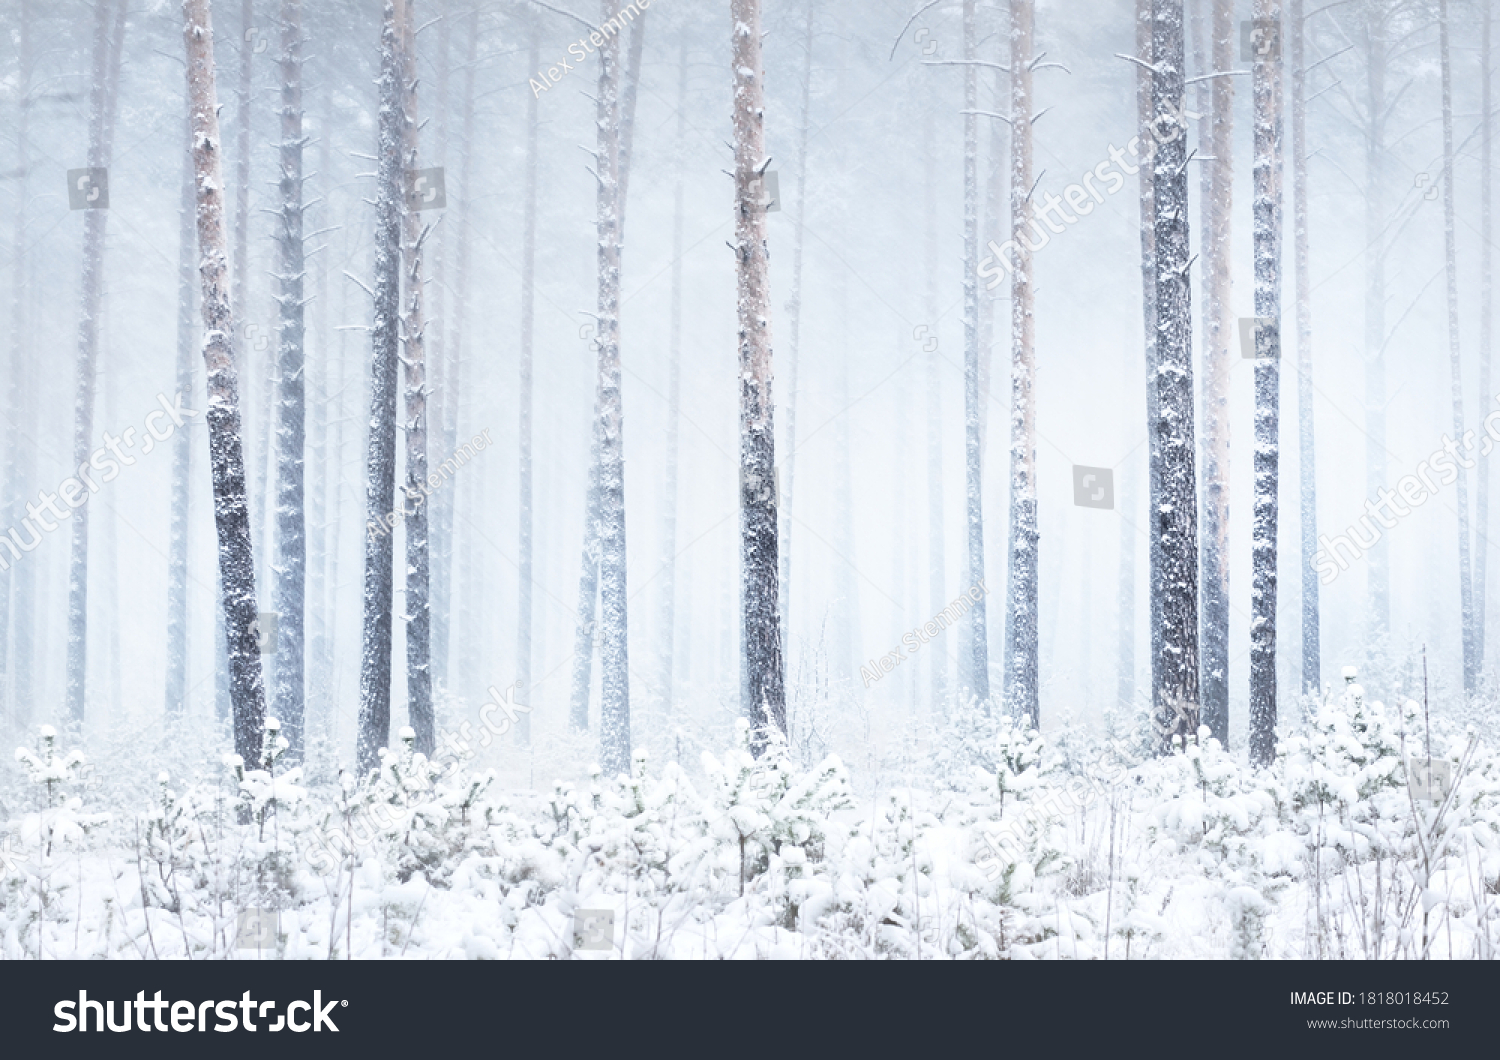 Snow-covered pine tree forest in a blizzard. Mighty evergreen trees close-up. Atmospheric landscape. Idyllic rural scene. Winter wonderland. Panoramic view. Pure nature, climate change, seasons #1818018452